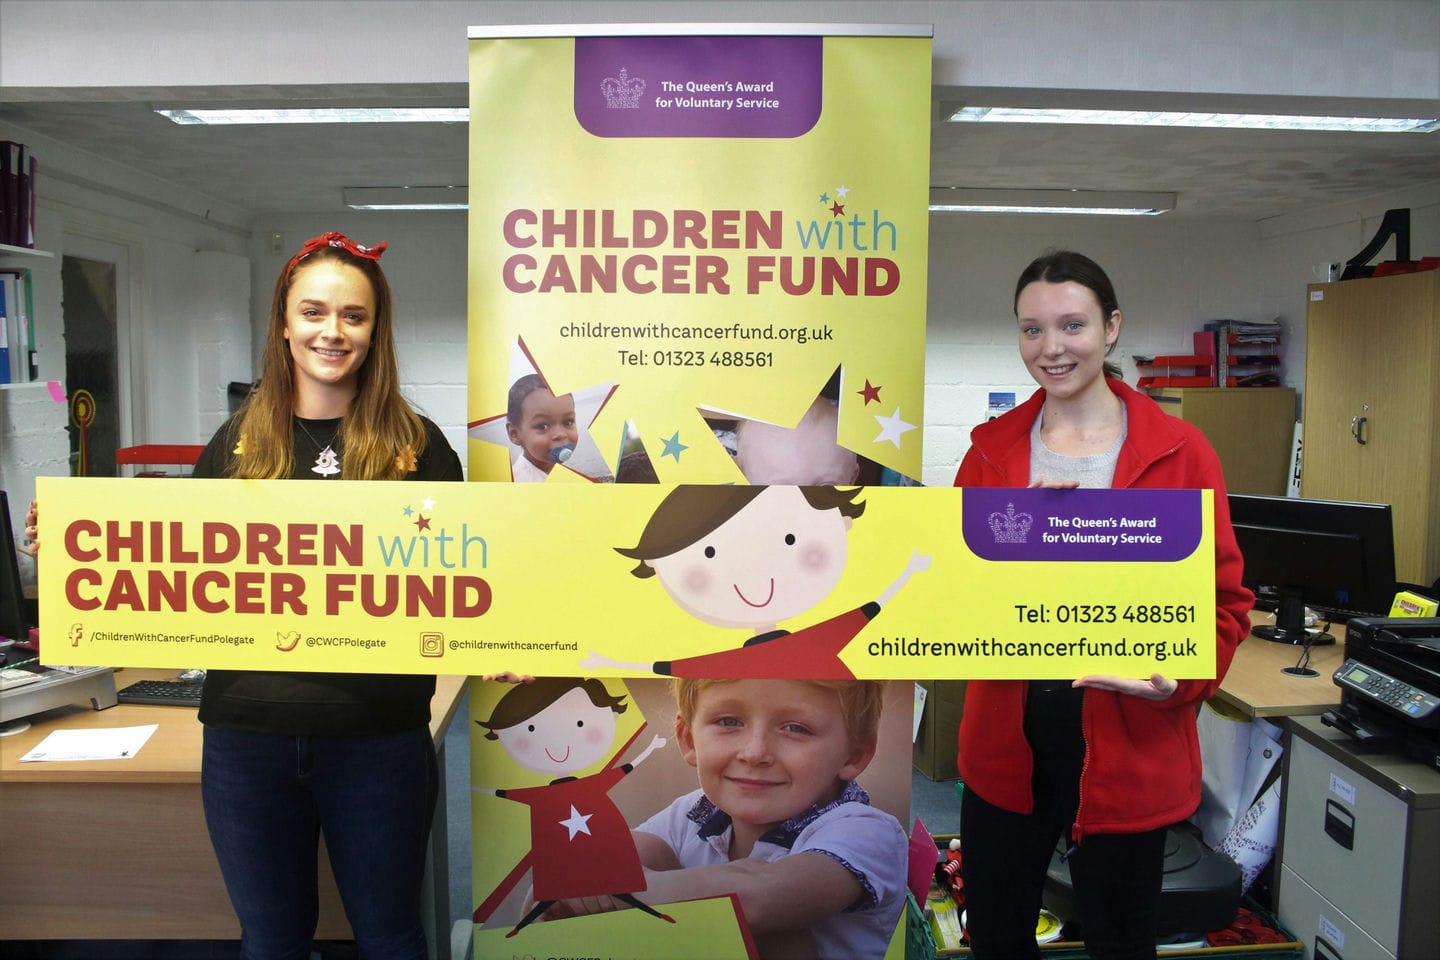 Two members of Identity hold up a sign saying children with cancer fund